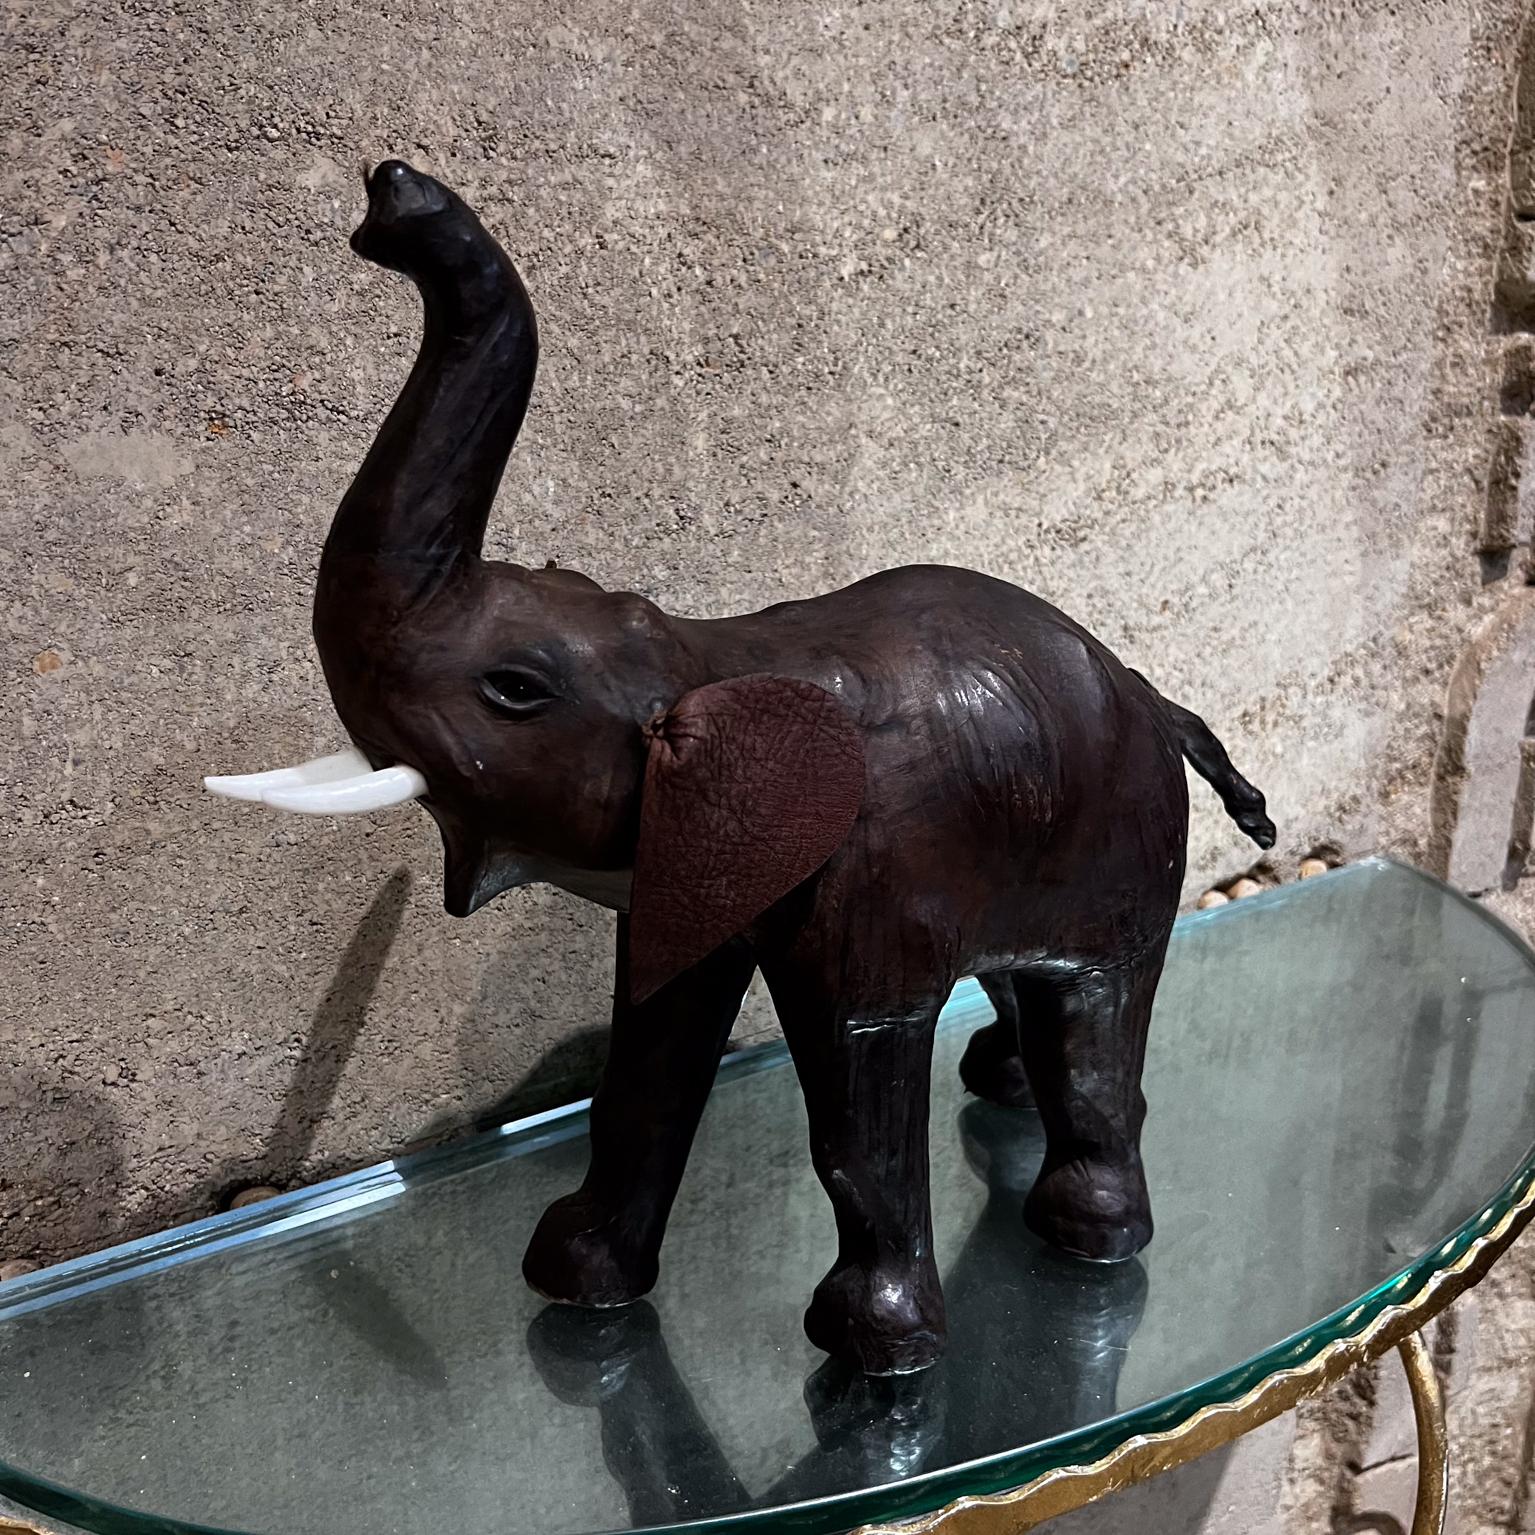 Midcentury Modern Leather Elephant Table Sculpture
13.5 d x 13.25 tall x 4.75 w
Original vintage unrestored condition
See all images provided.